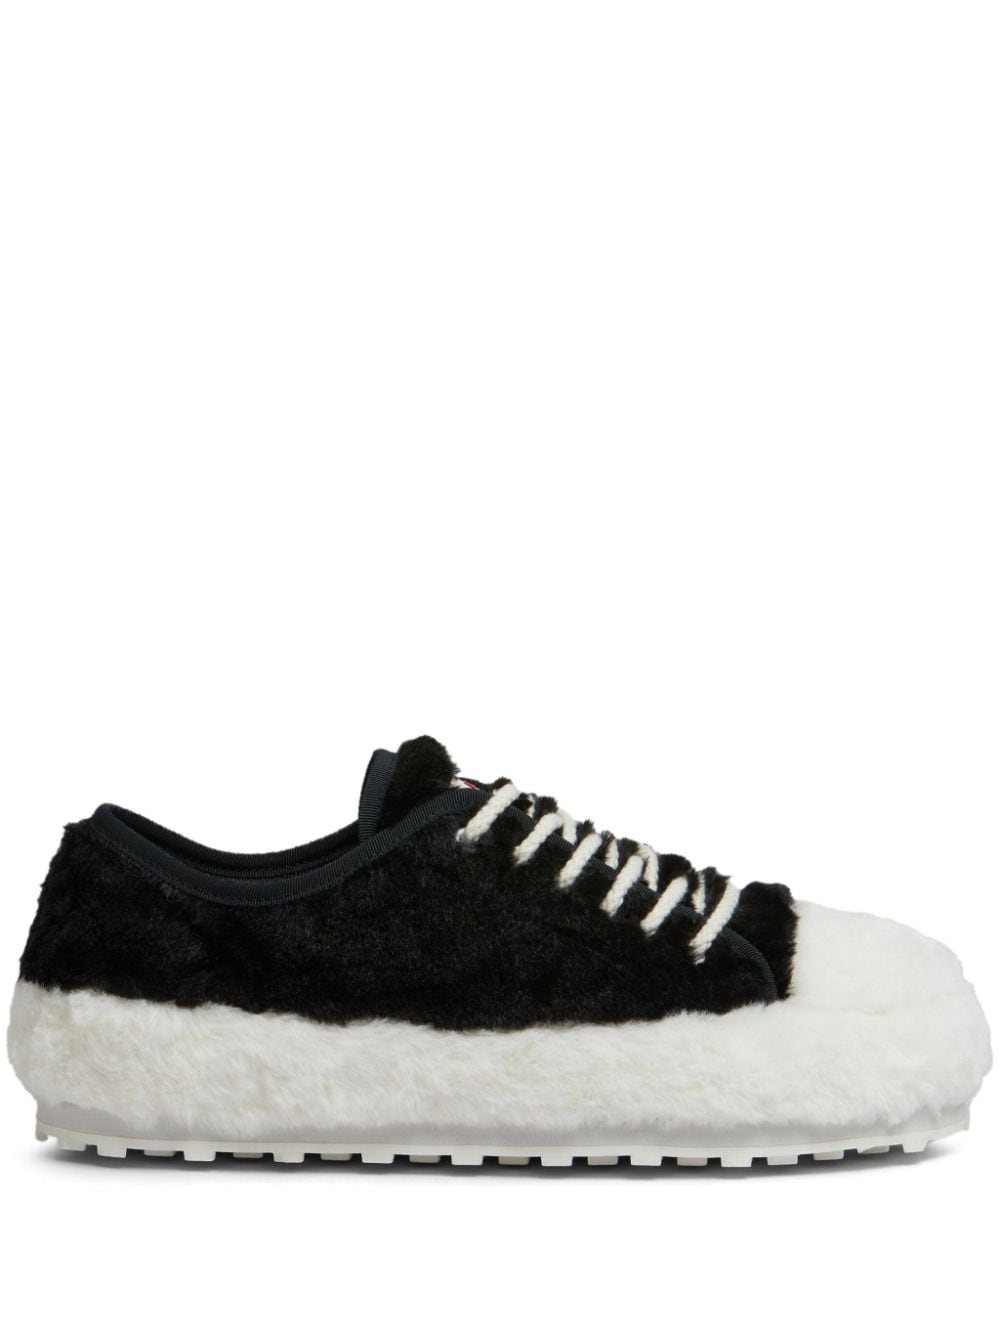 Marni Teddy lace-up sneakers Black